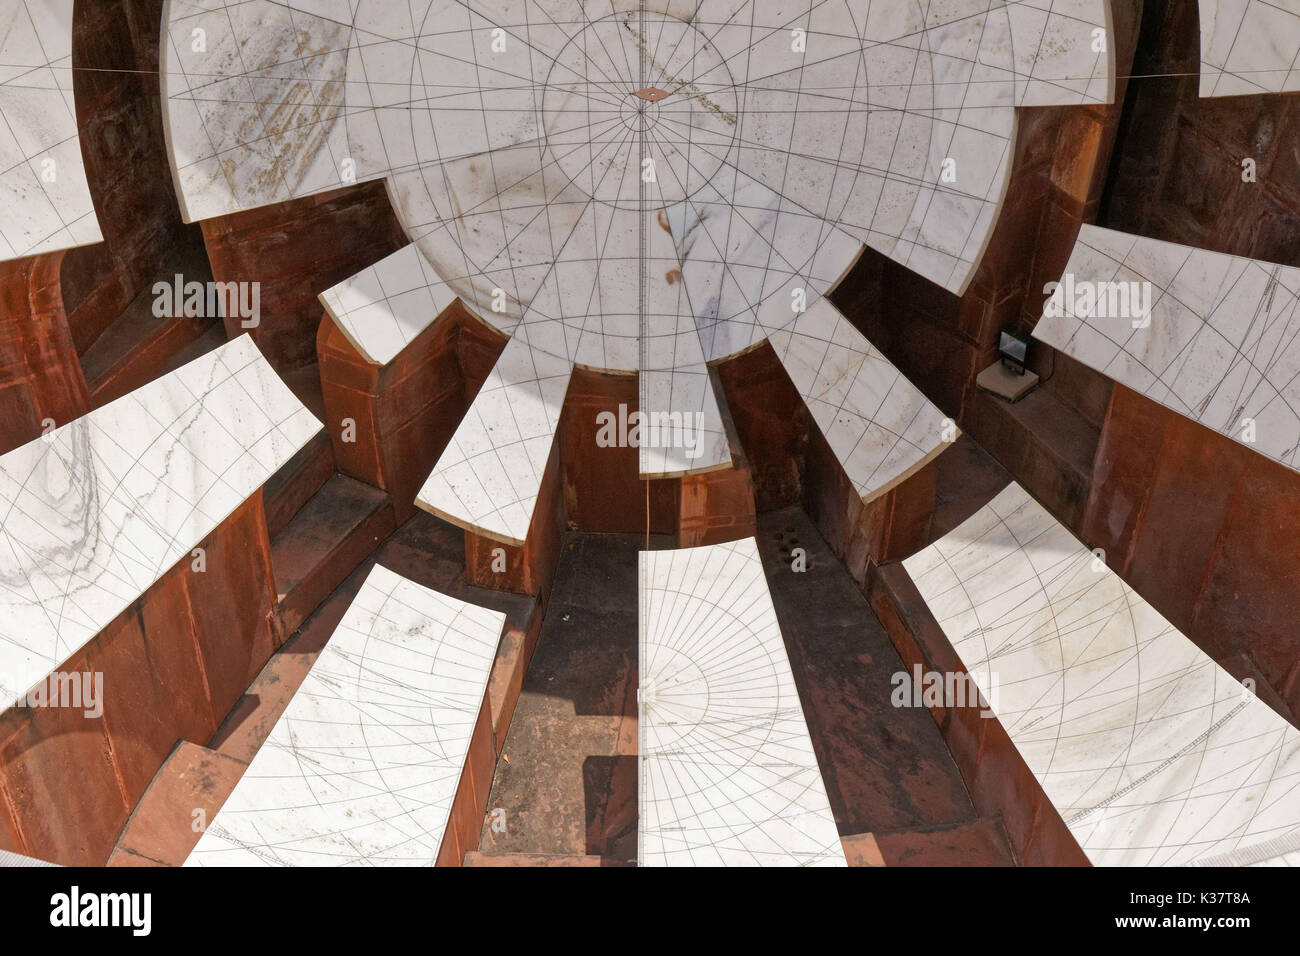 Jaipur, India. Jantar Mantar, a collection of nineteen architectural astronomical instruments completed in 1734. Jai Prakash Yantra. Stock Photo